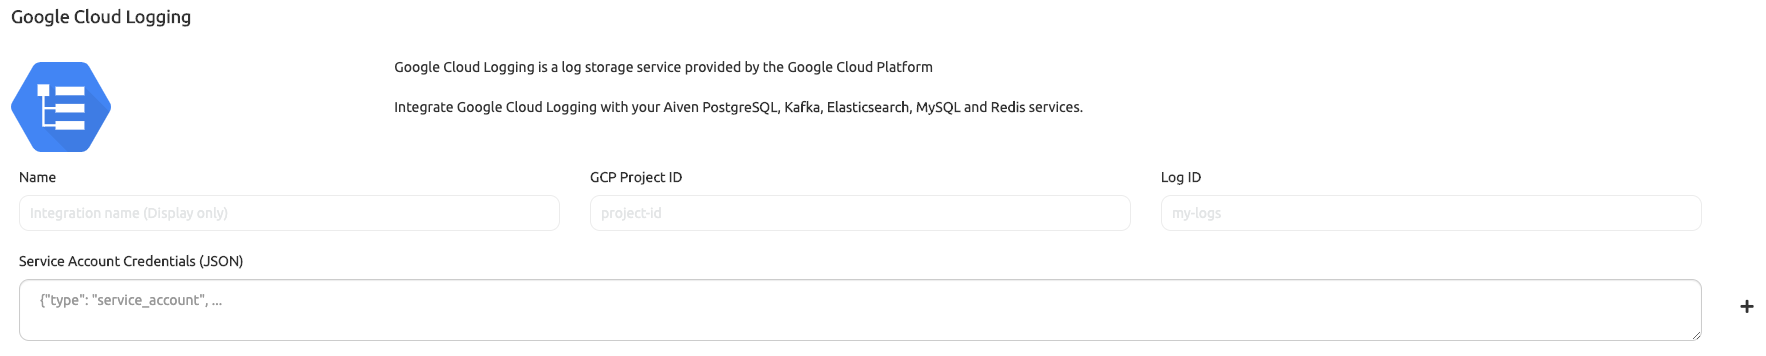 google cloud logging access rights fixed